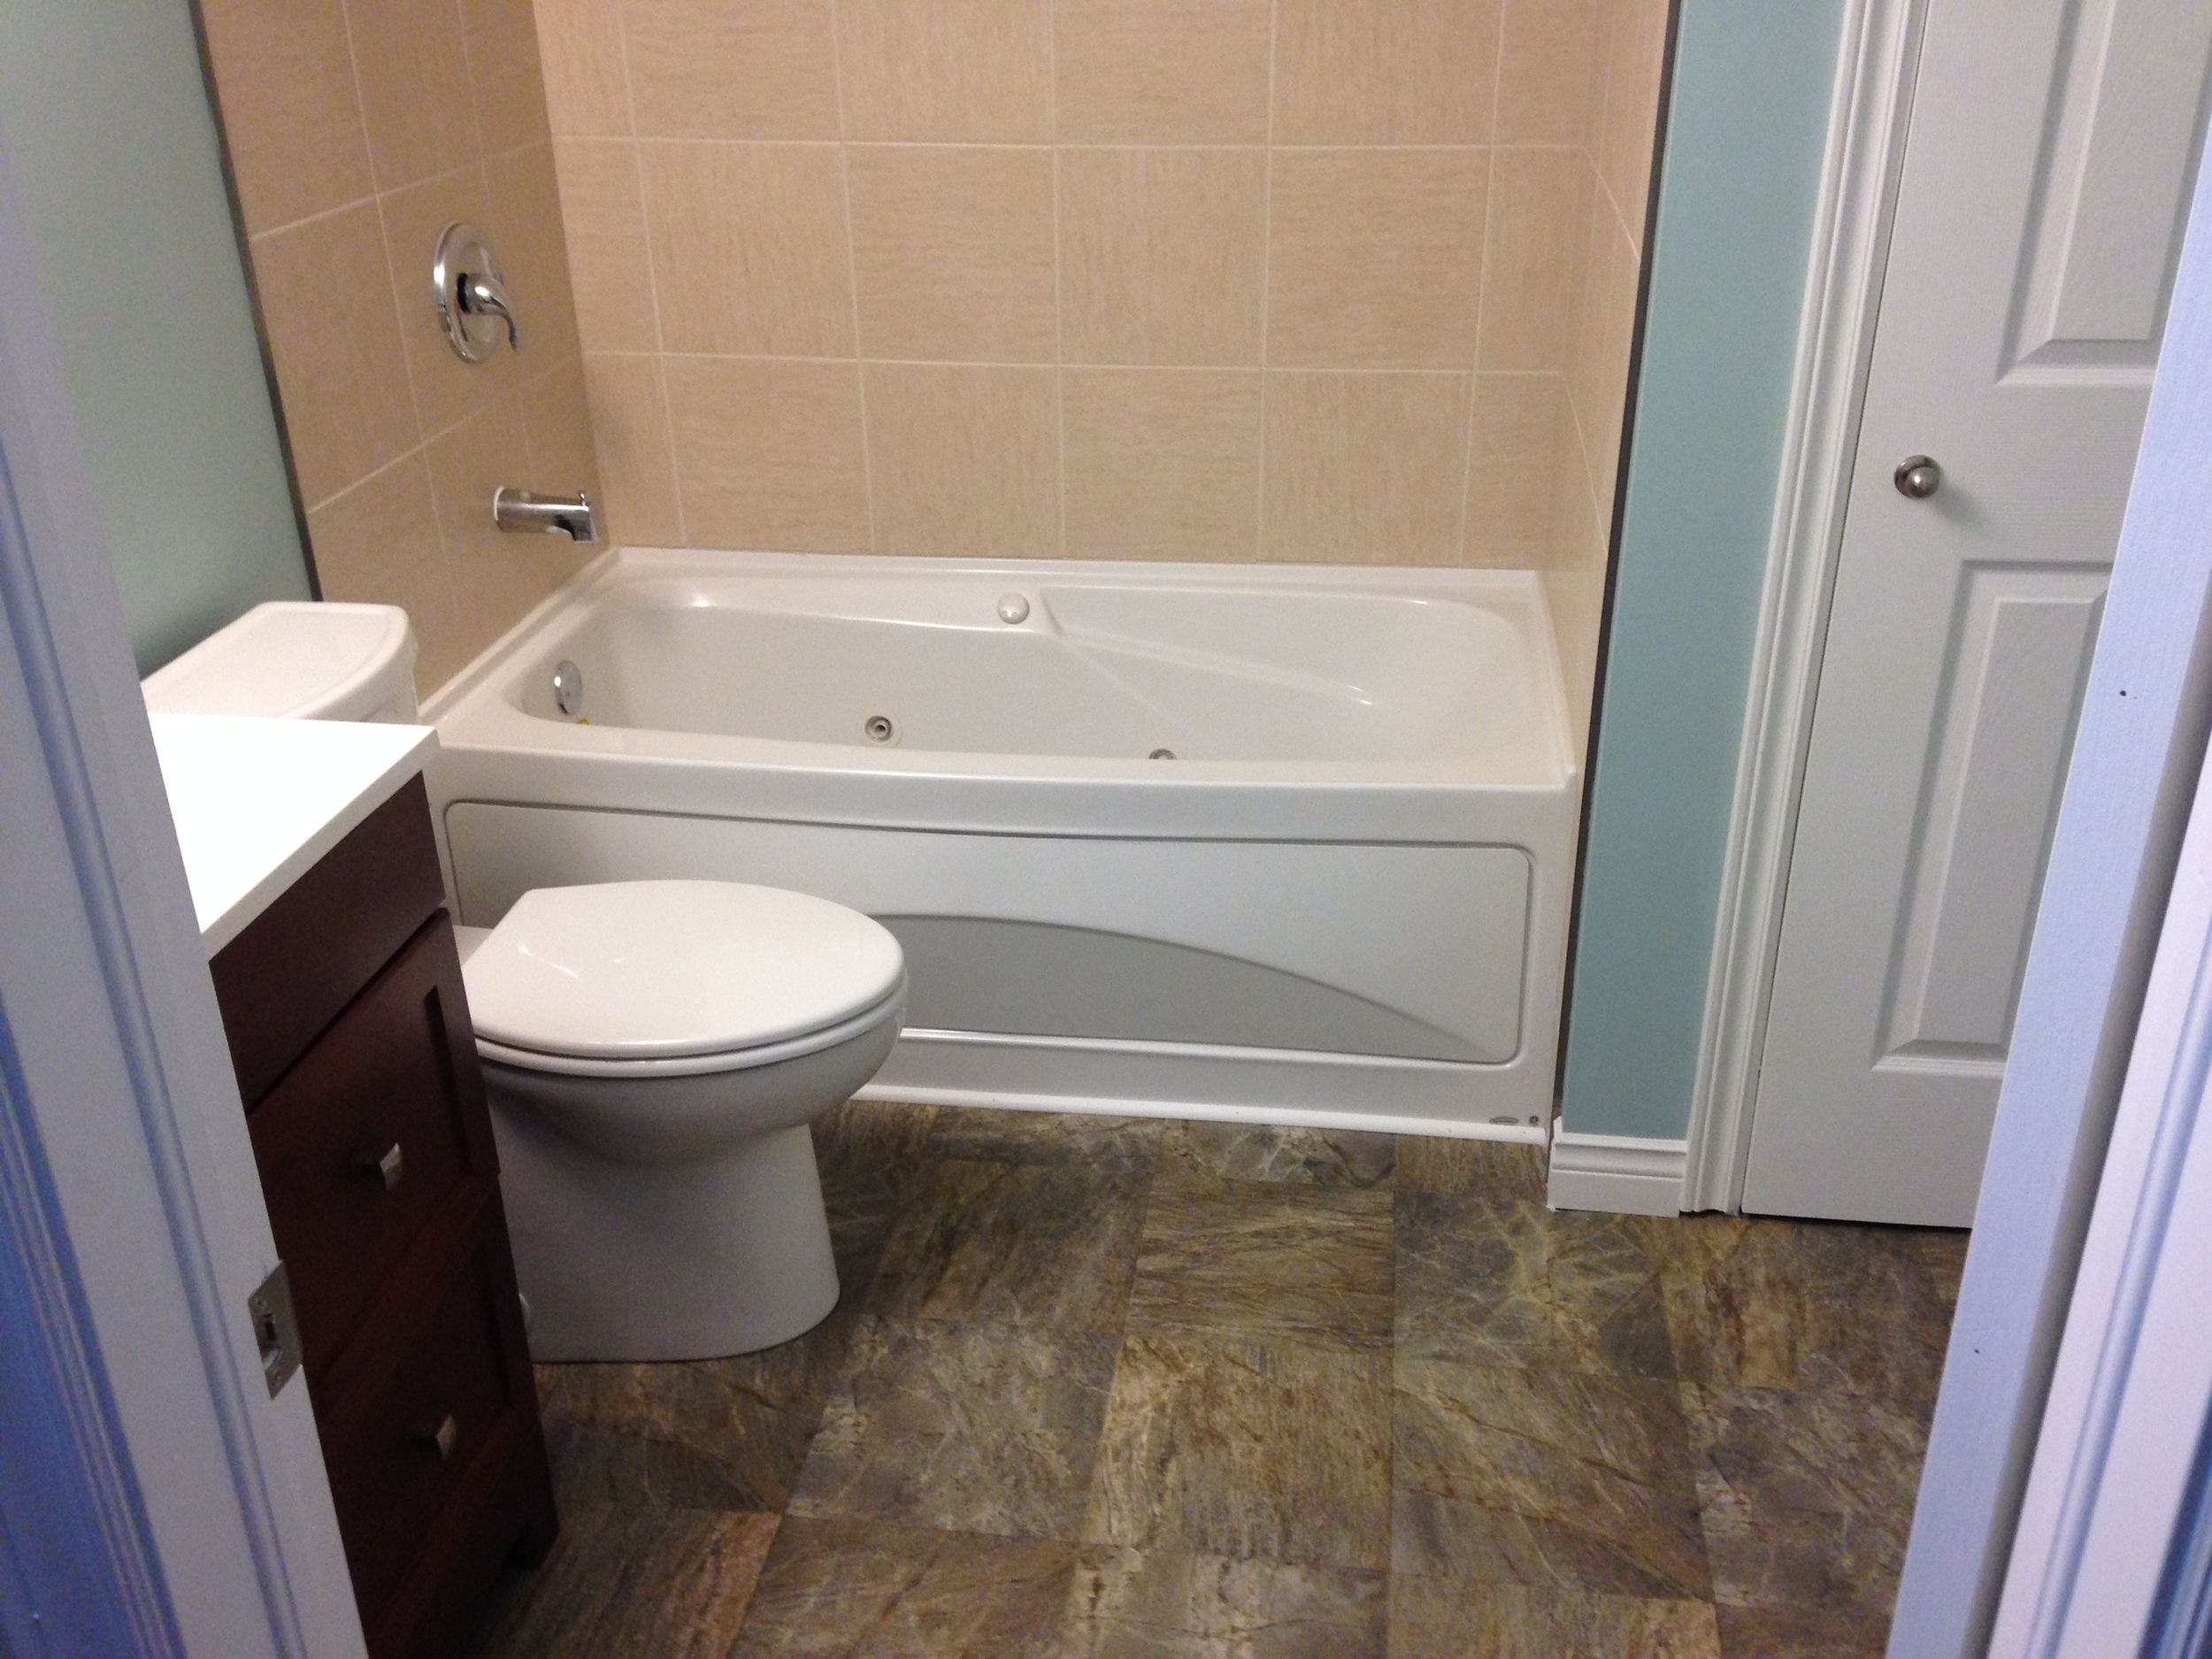 New bathtub with tiled surround, toilet and vanity